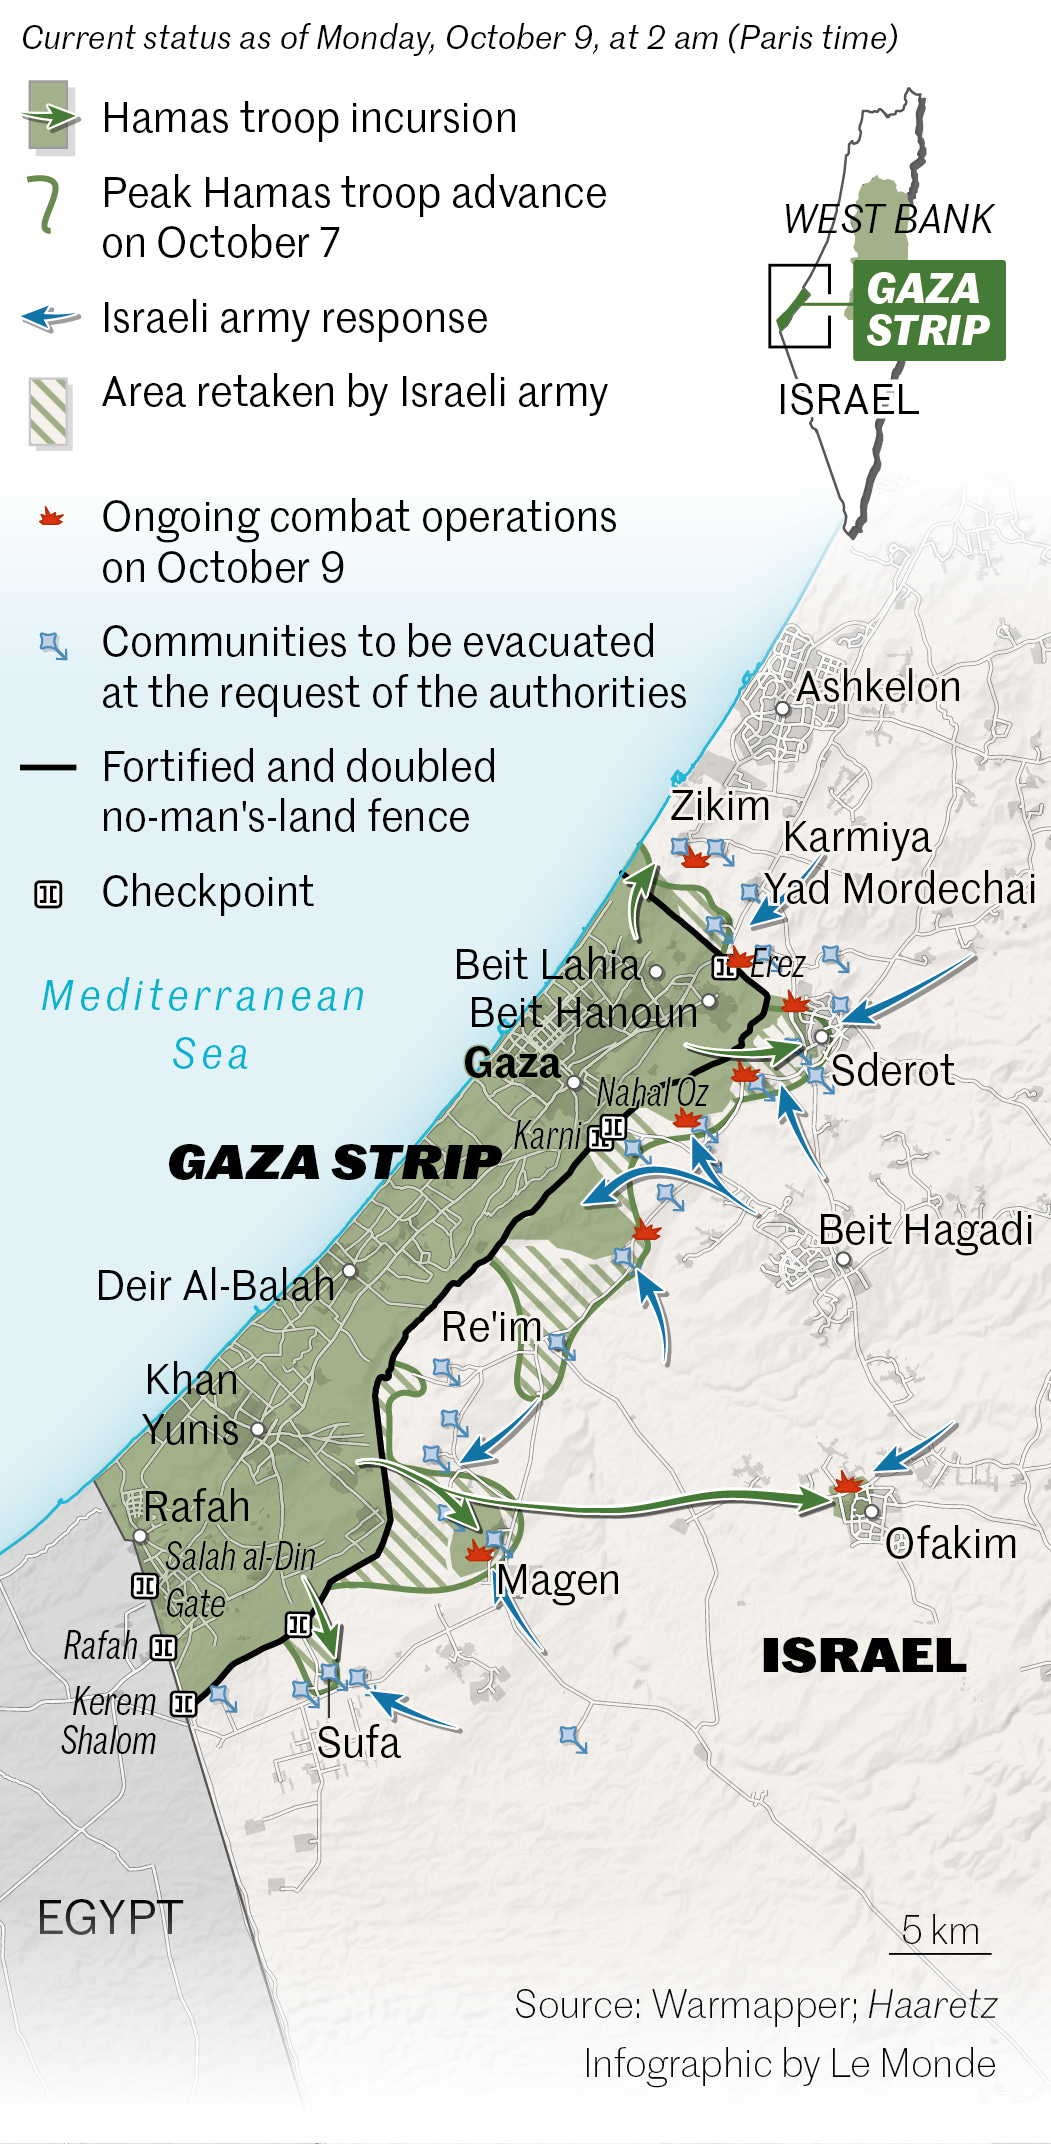 One map to understand how Hamas attacked Israel